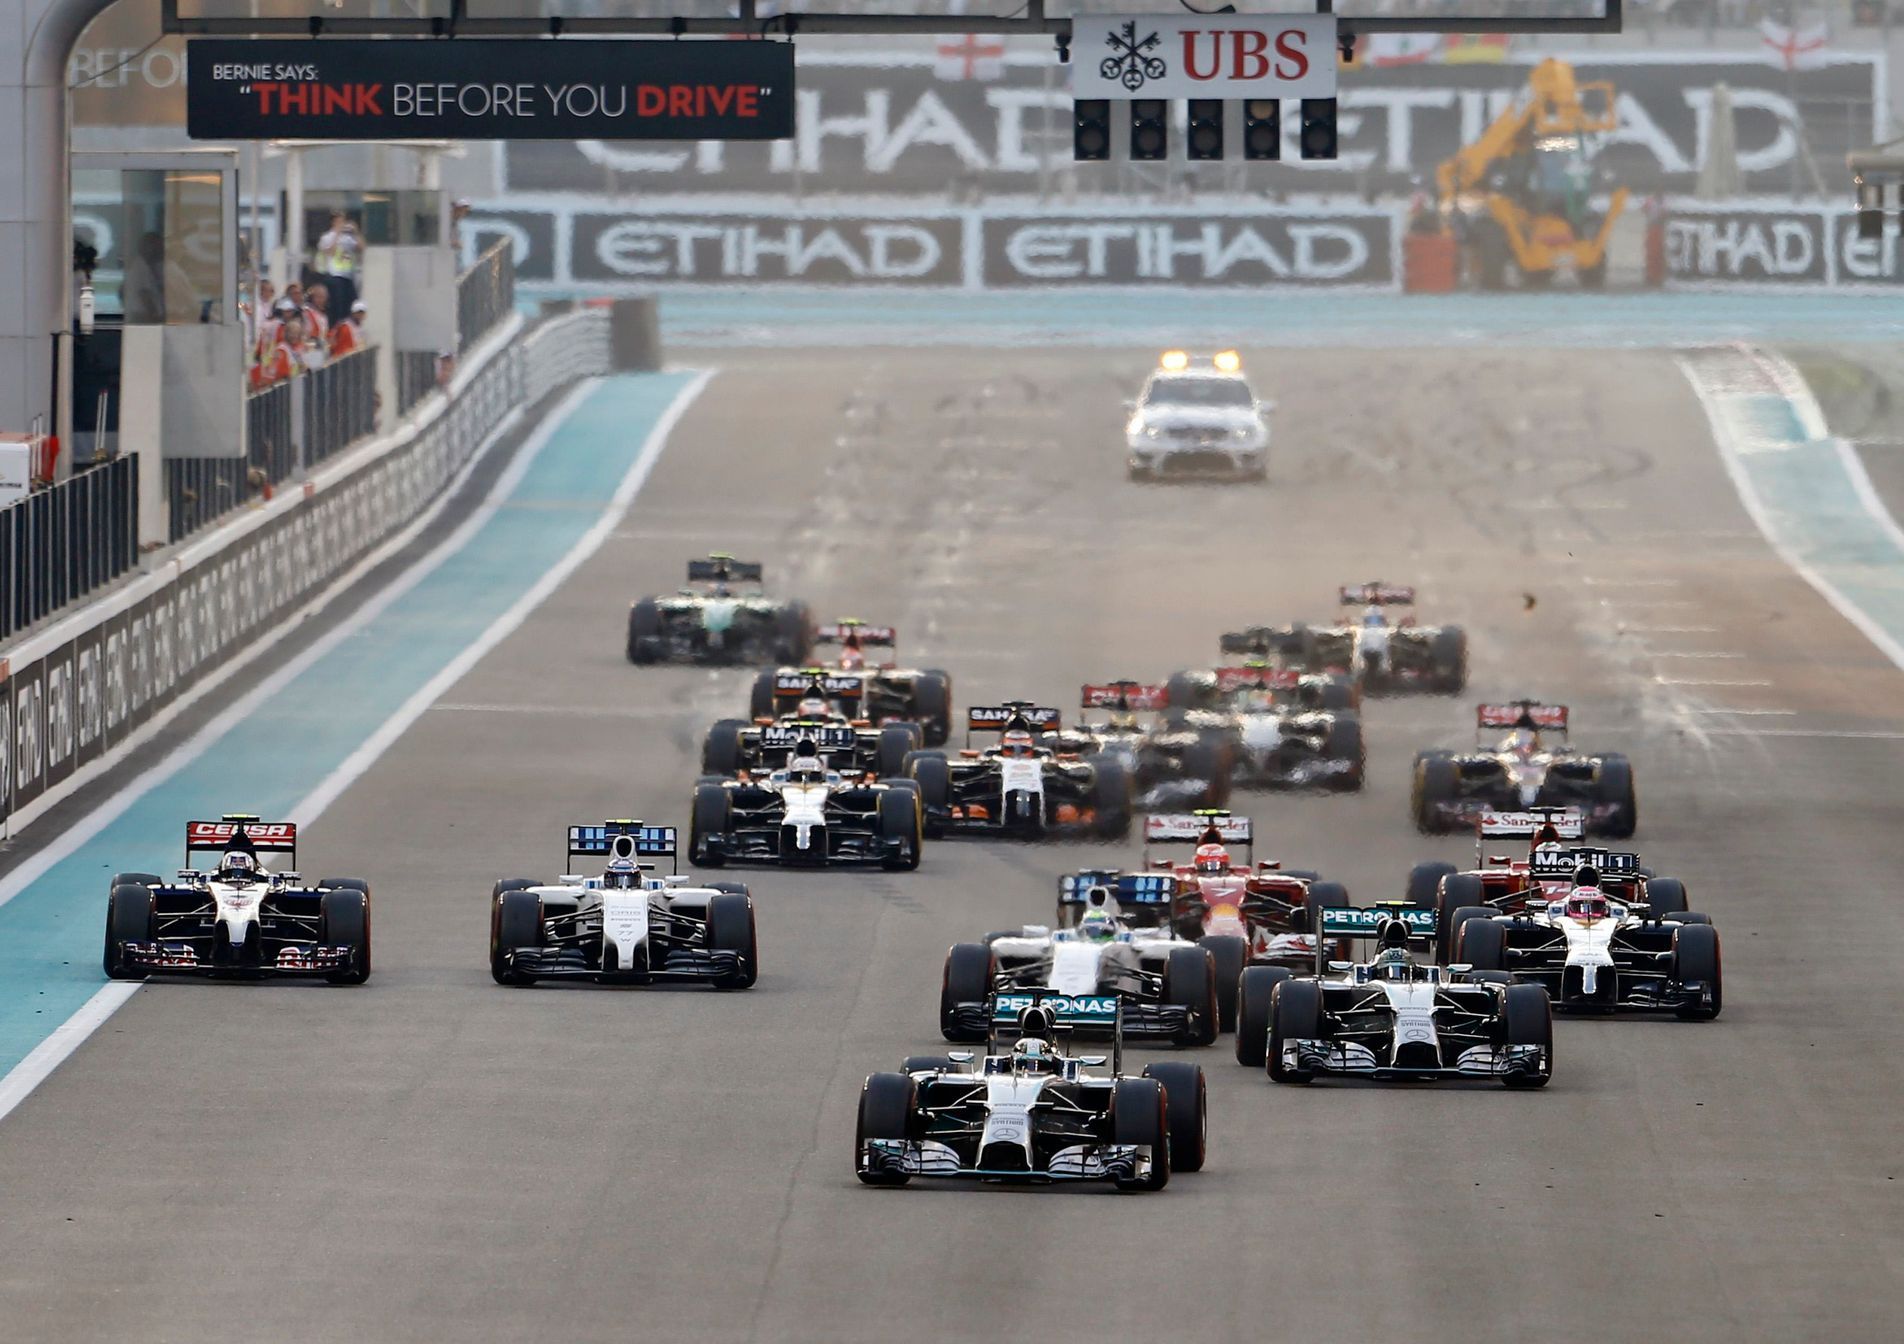 Mercedes Formula One driver Lewis Hamilton of Britain leads the pack as they approach the first turn during the Abu Dhabi F1 Grand Prix at the Yas Marina circuit in Abu Dhabi